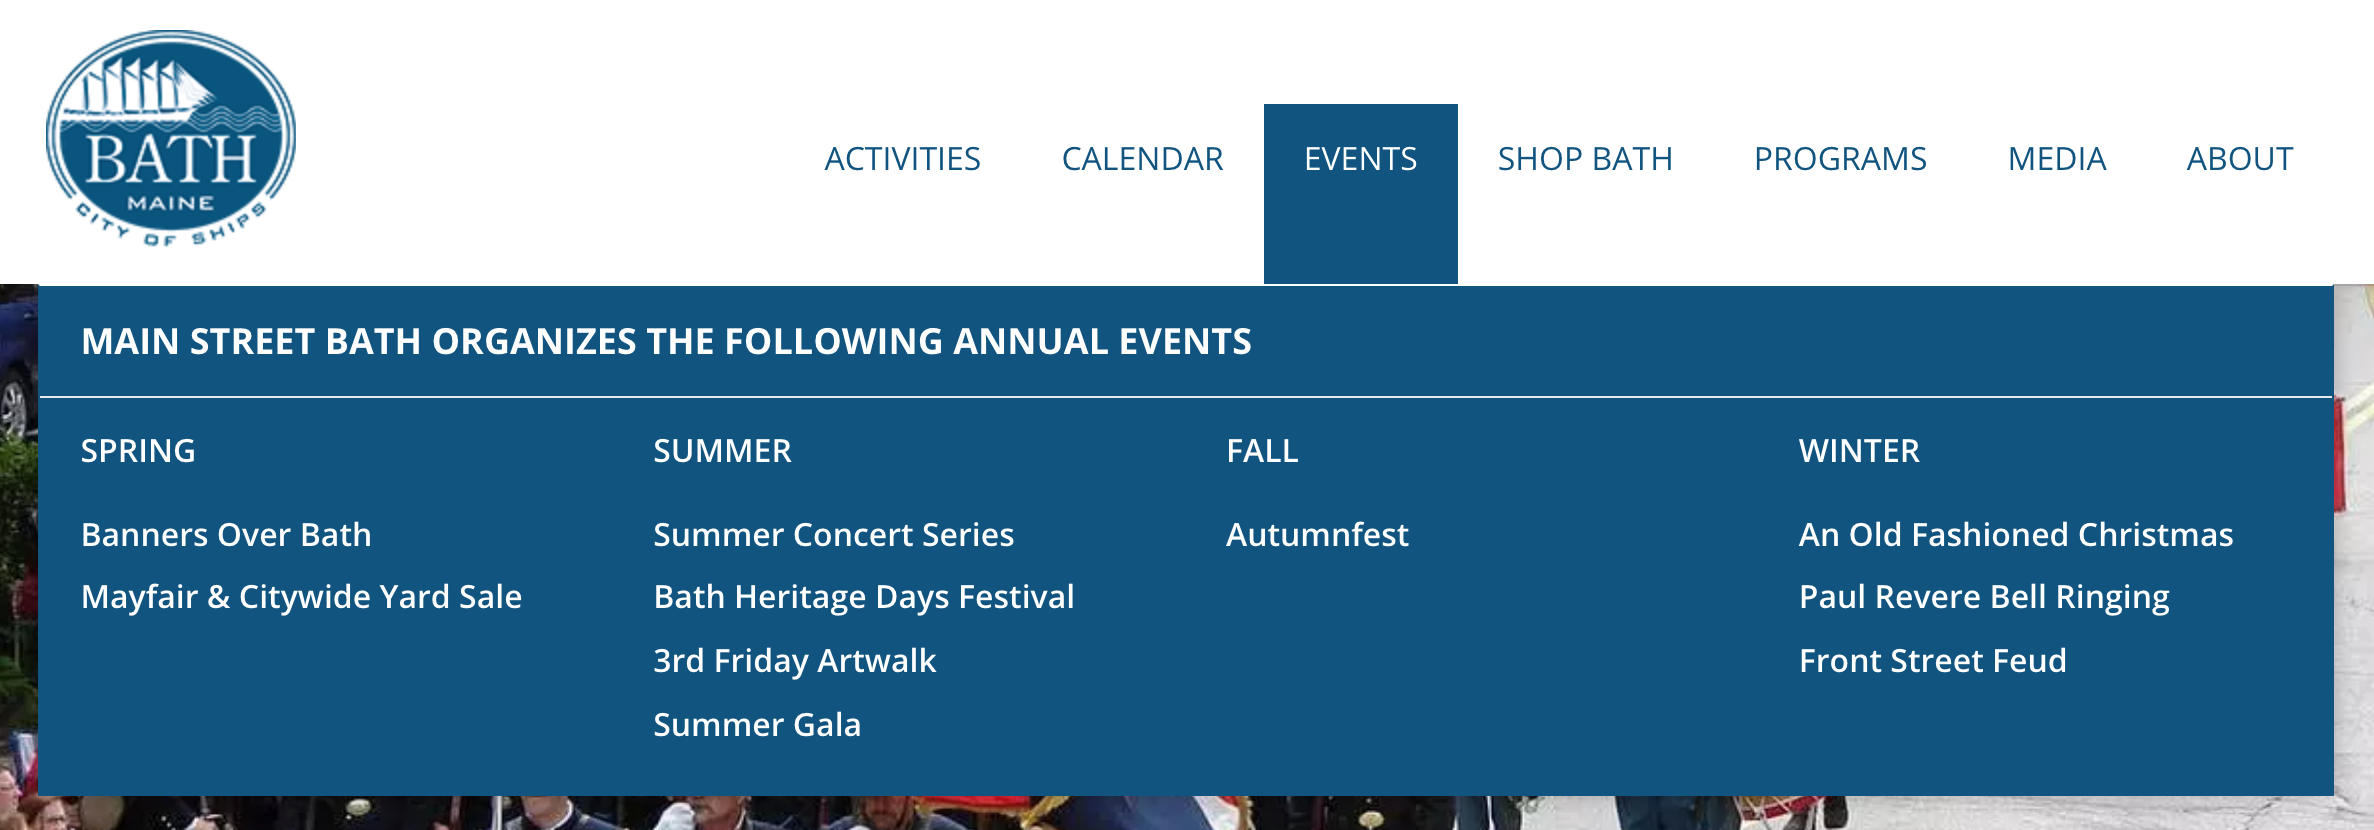 Events featured in the main nav of visitbath.com